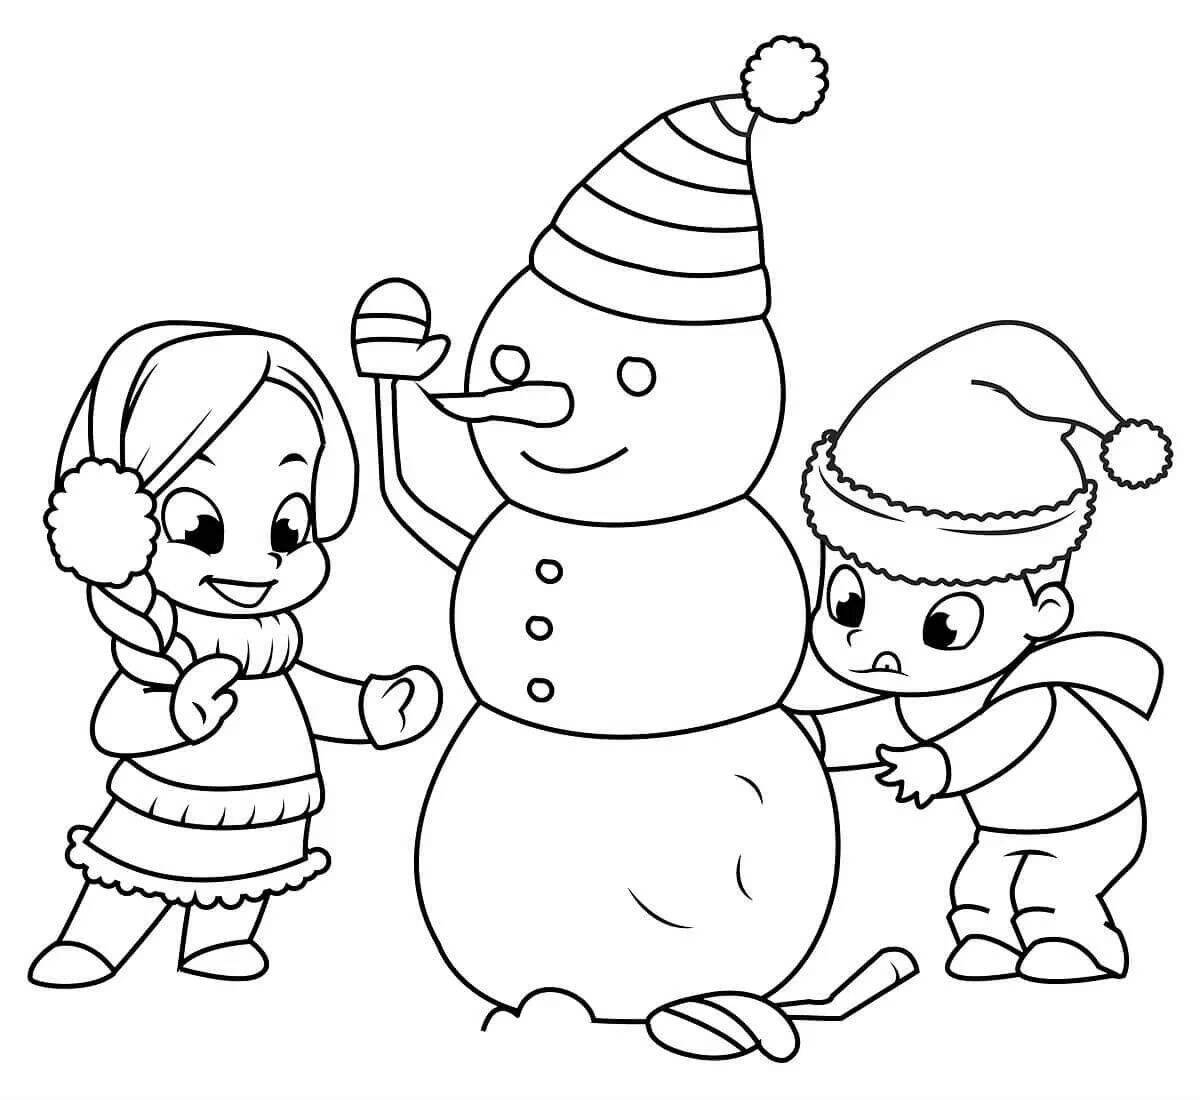 Colorful snowman simulation coloring page